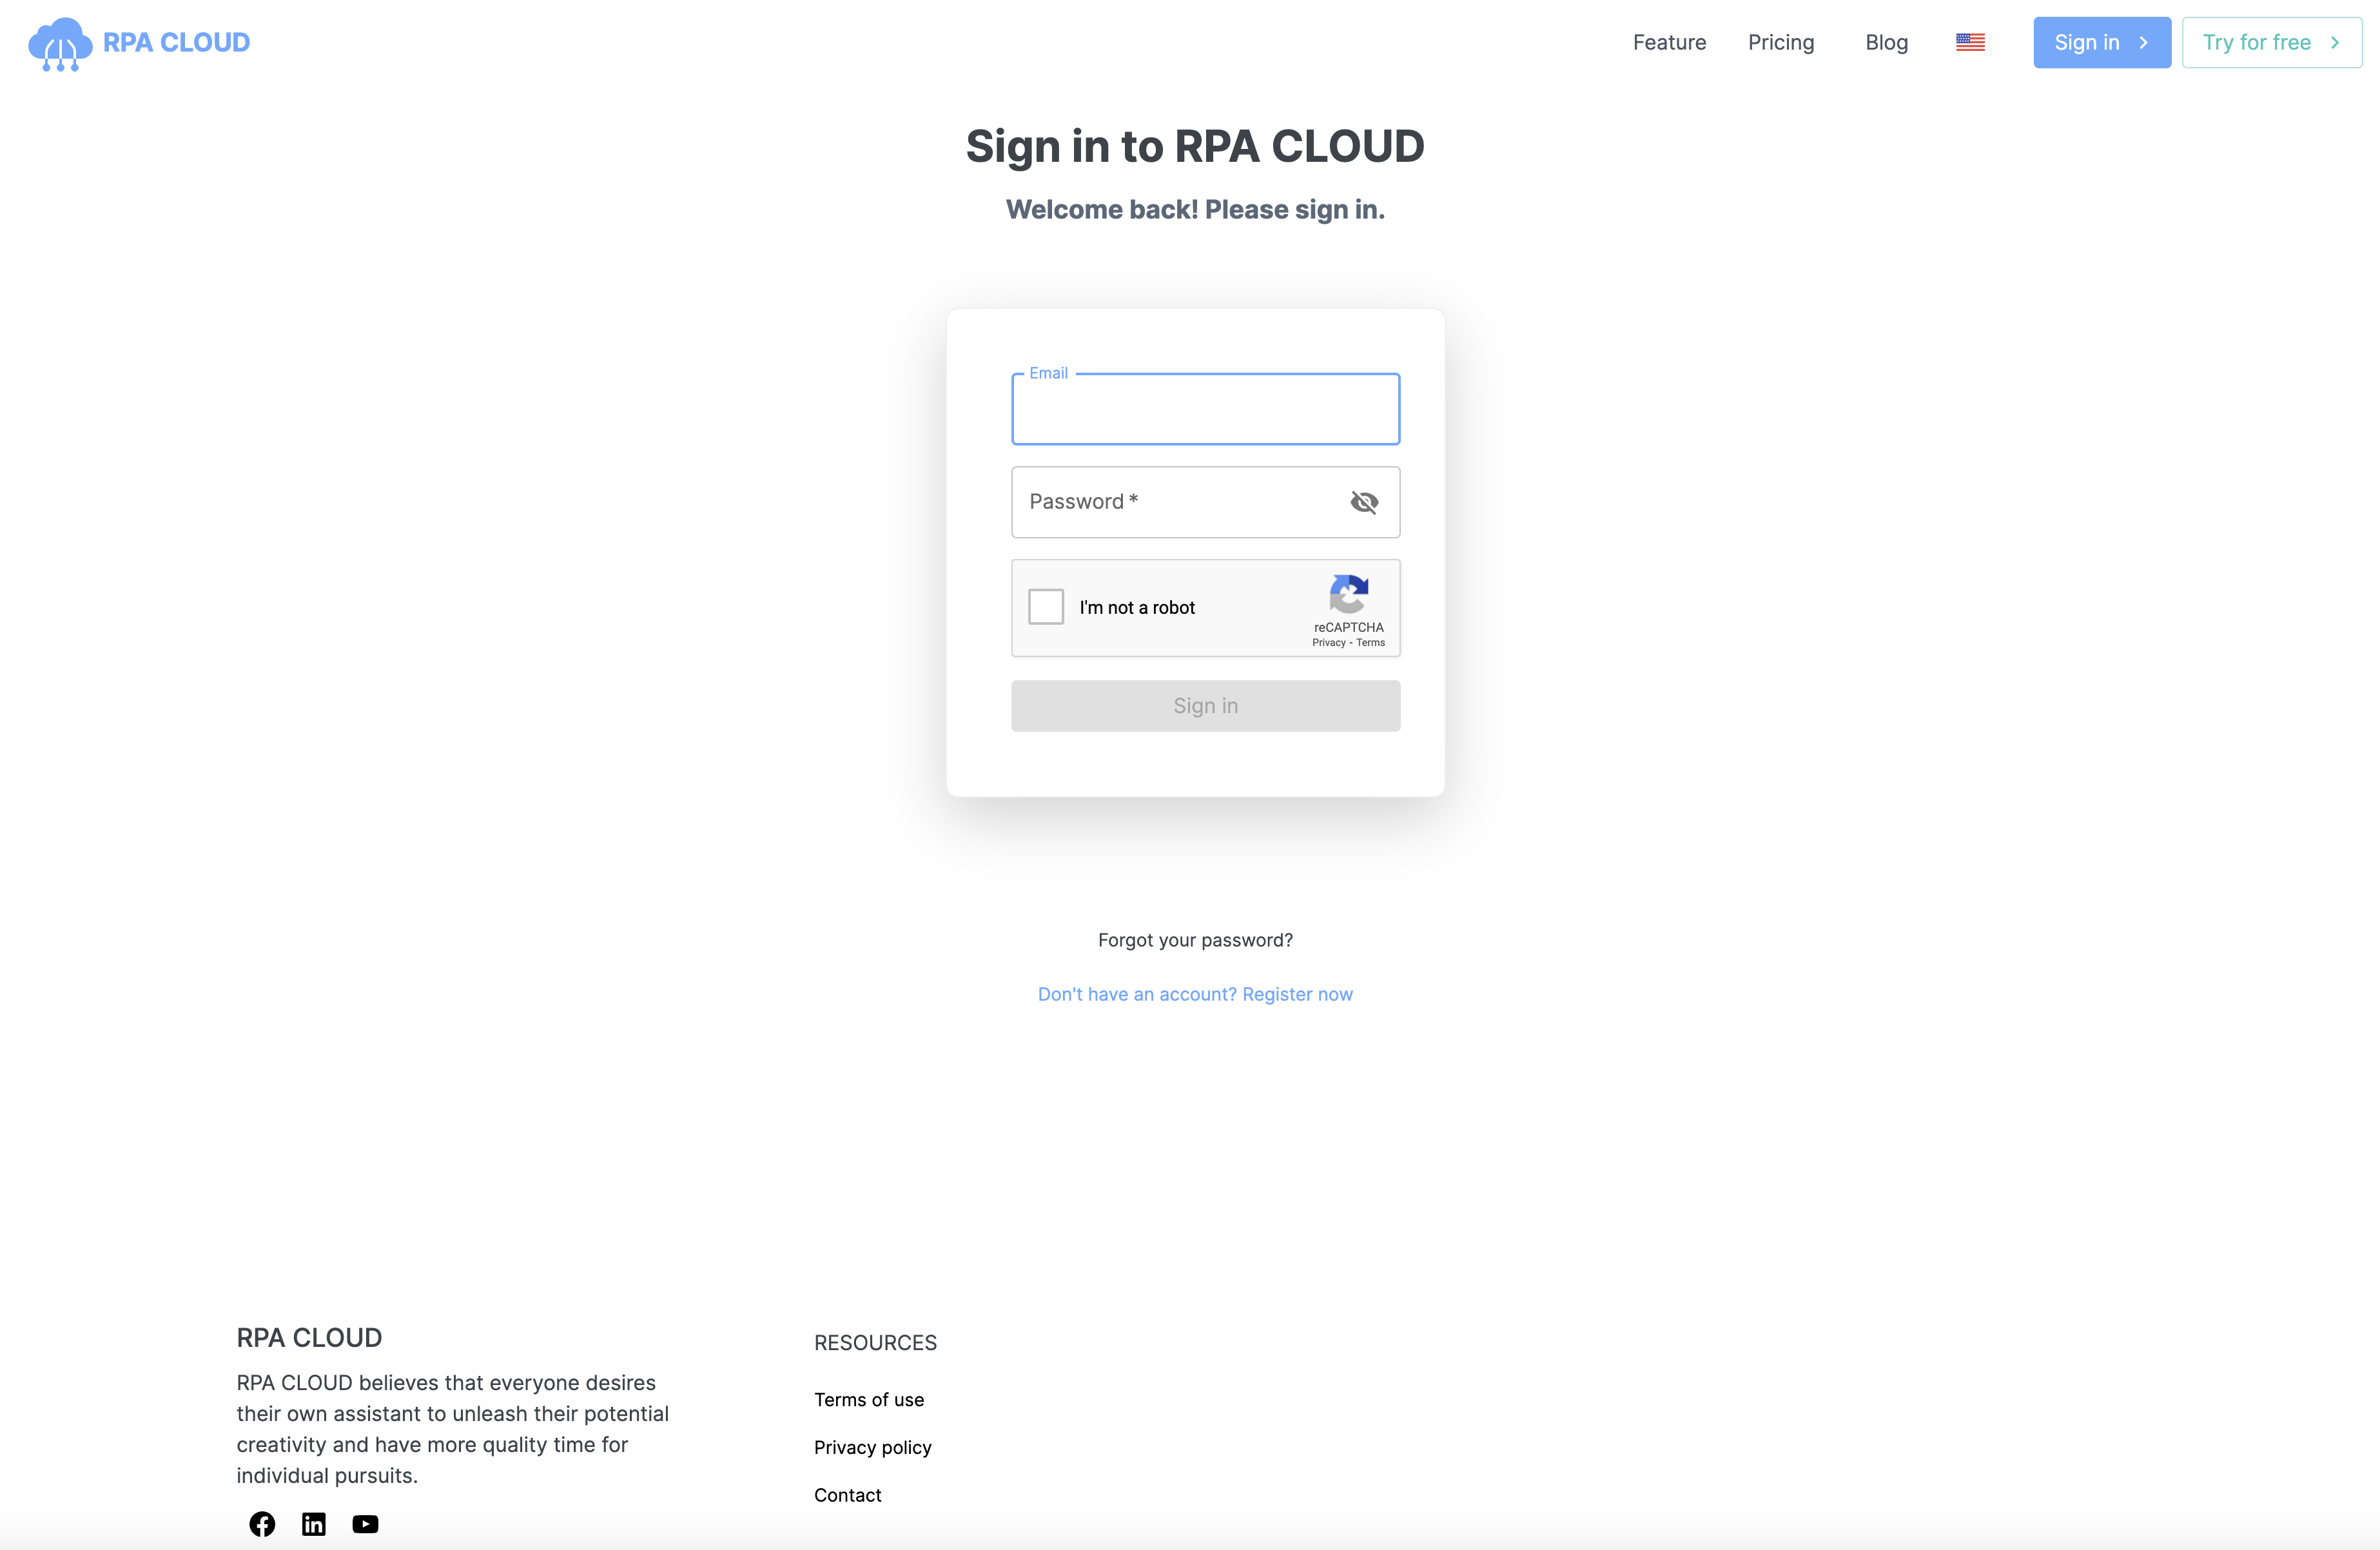 RPA CLOUD sign in page